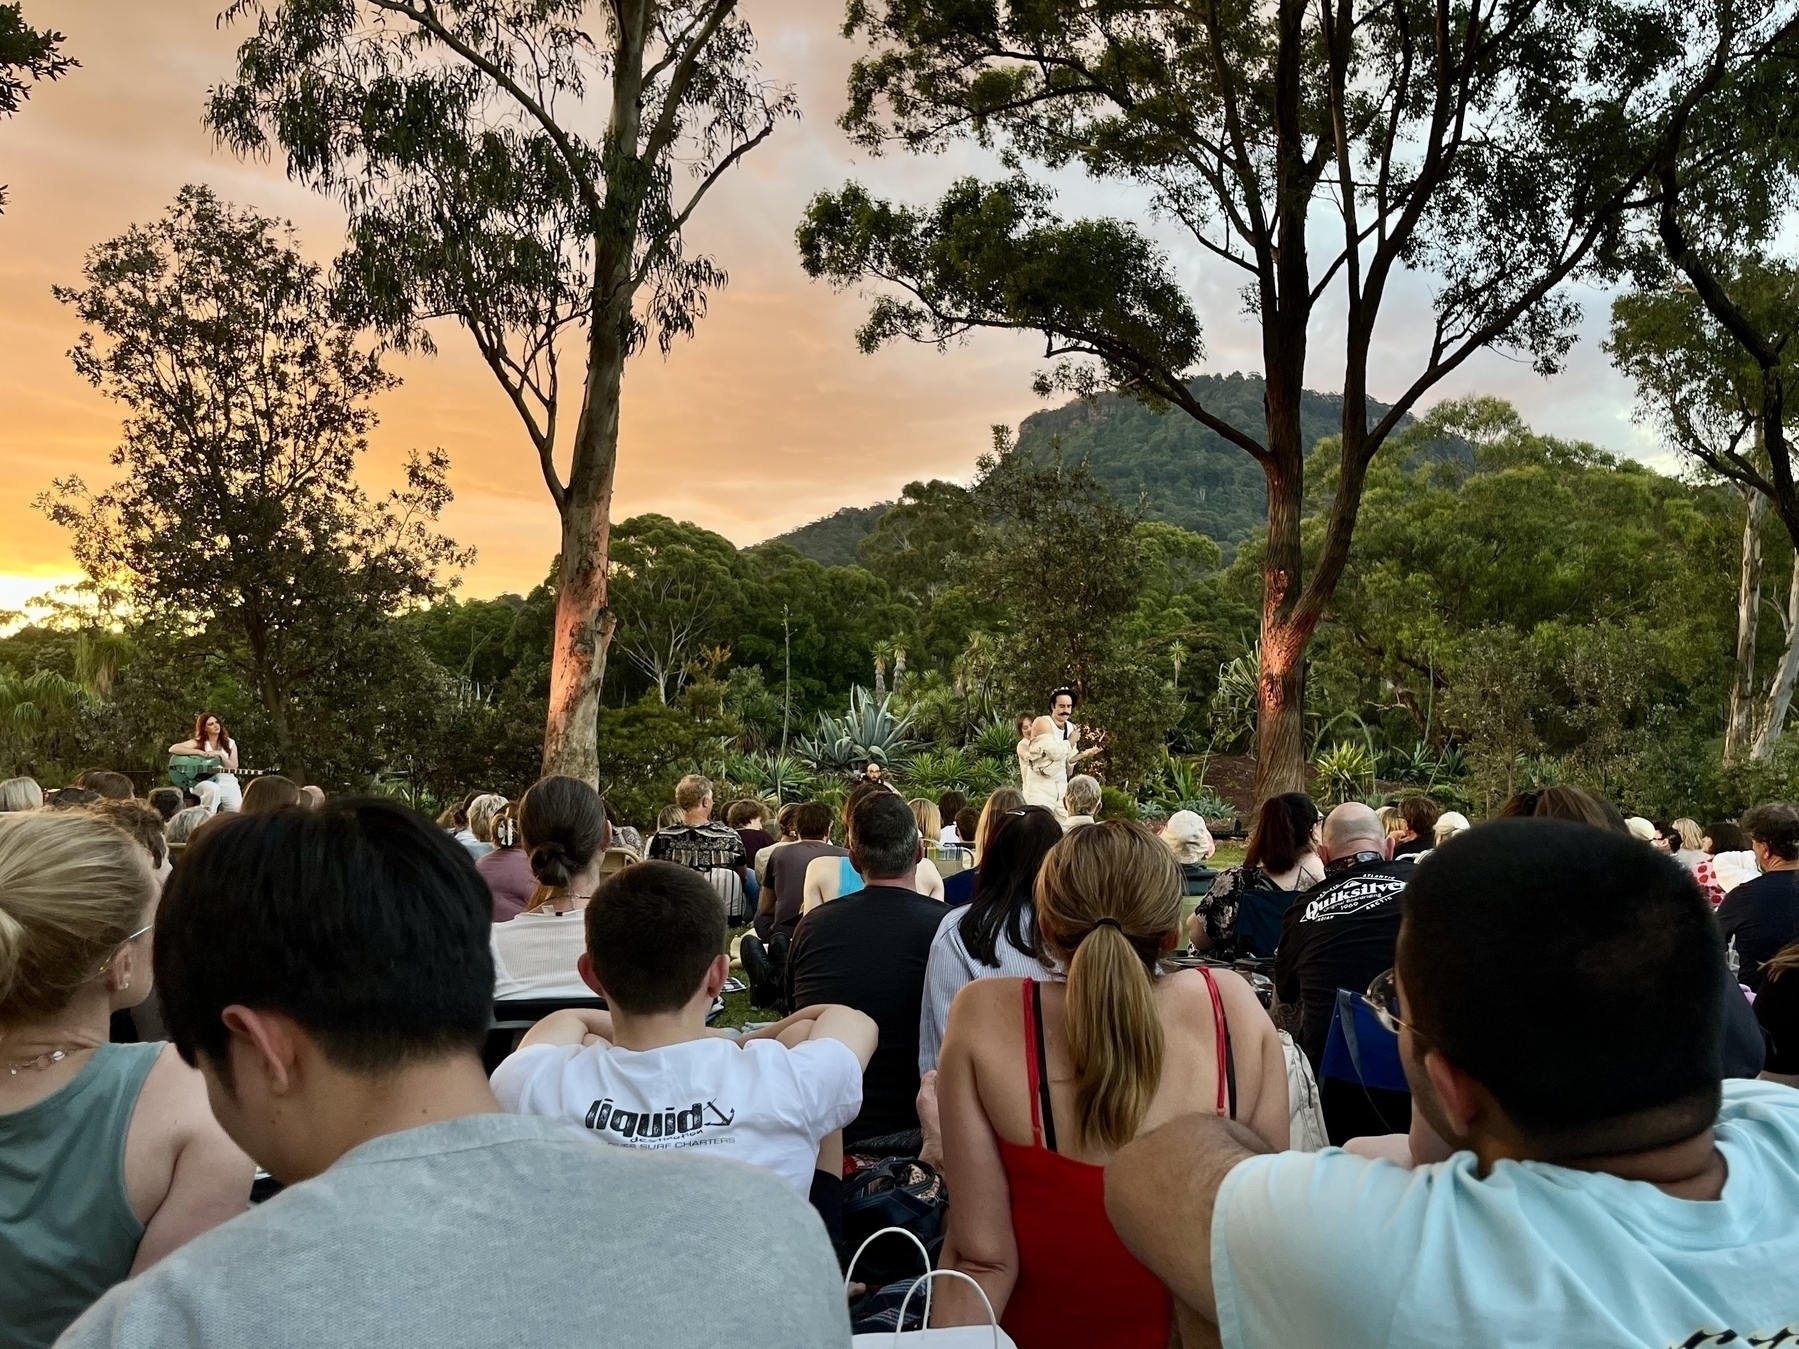 A crowd of people watching actors on a lawn under gum trees, with a mountain in the distance